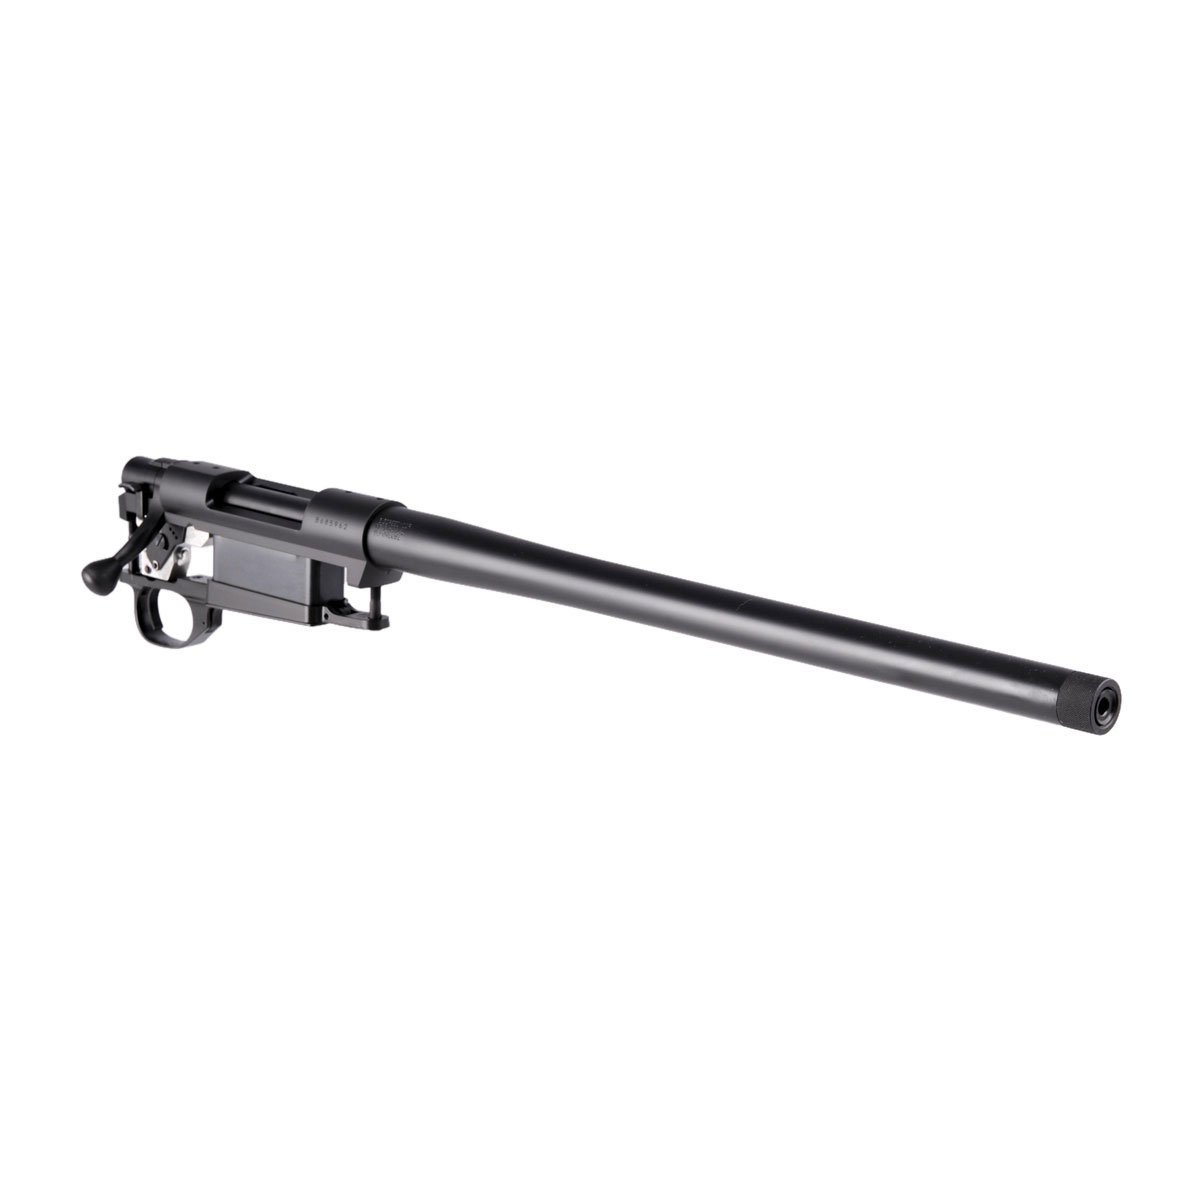 HOWA - M1500 308 WINCHESTER 16.25" BARRELED ACTION